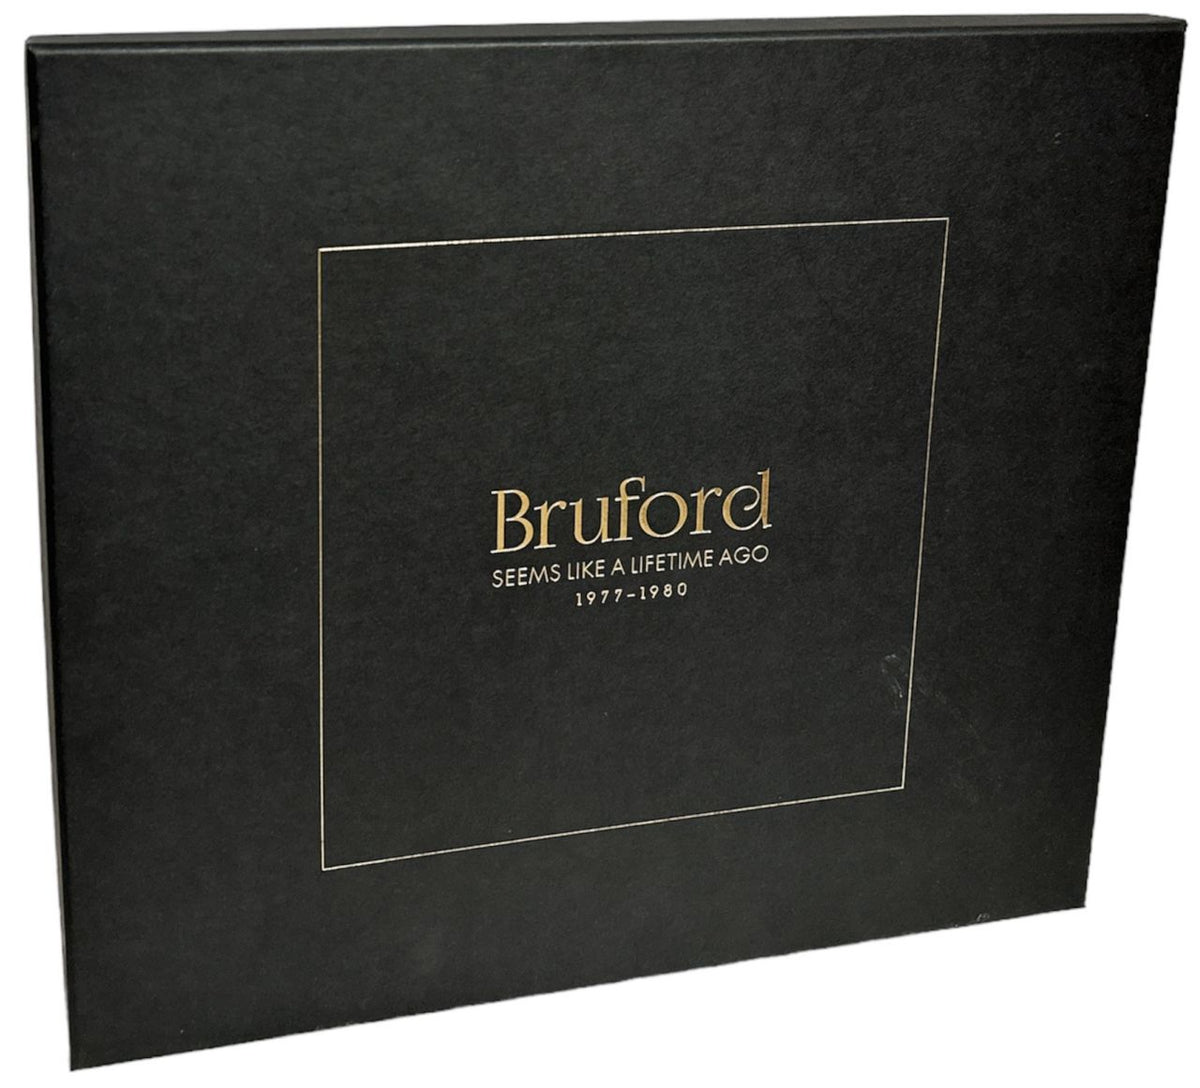 Bill Bruford Seems Like A Lifetime Ago - Signed & Numbered UK Cd